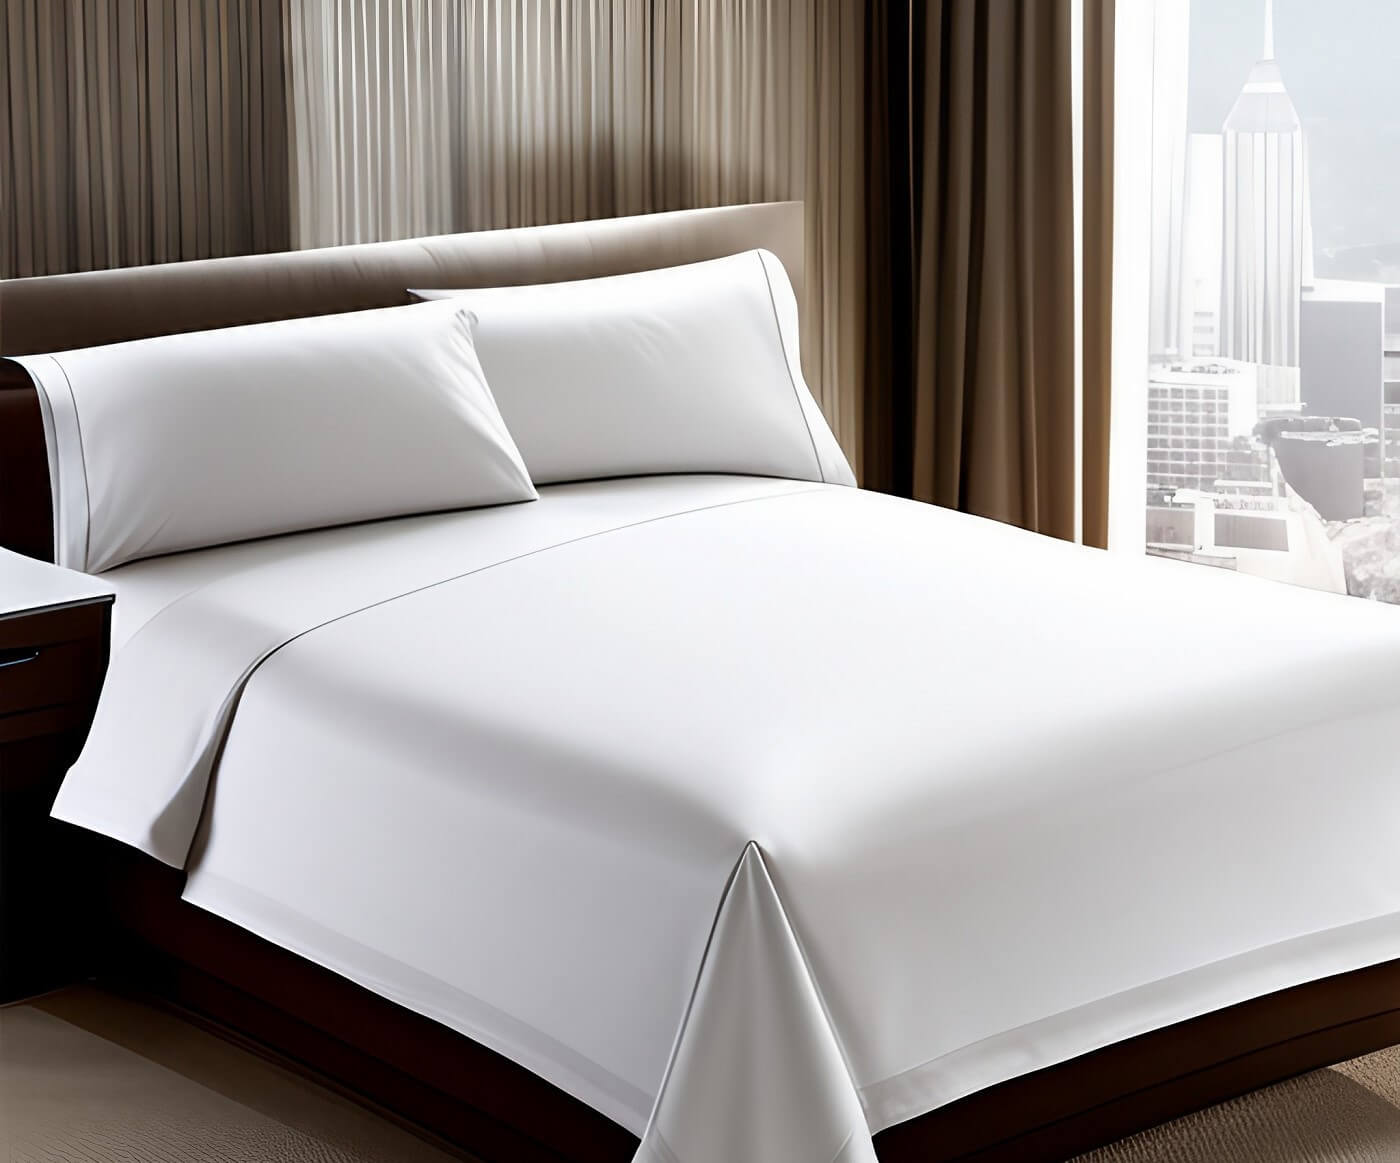 Different Advantages of Purchasing White Bedsheets in Bulk, by Gold  Textiles LTD